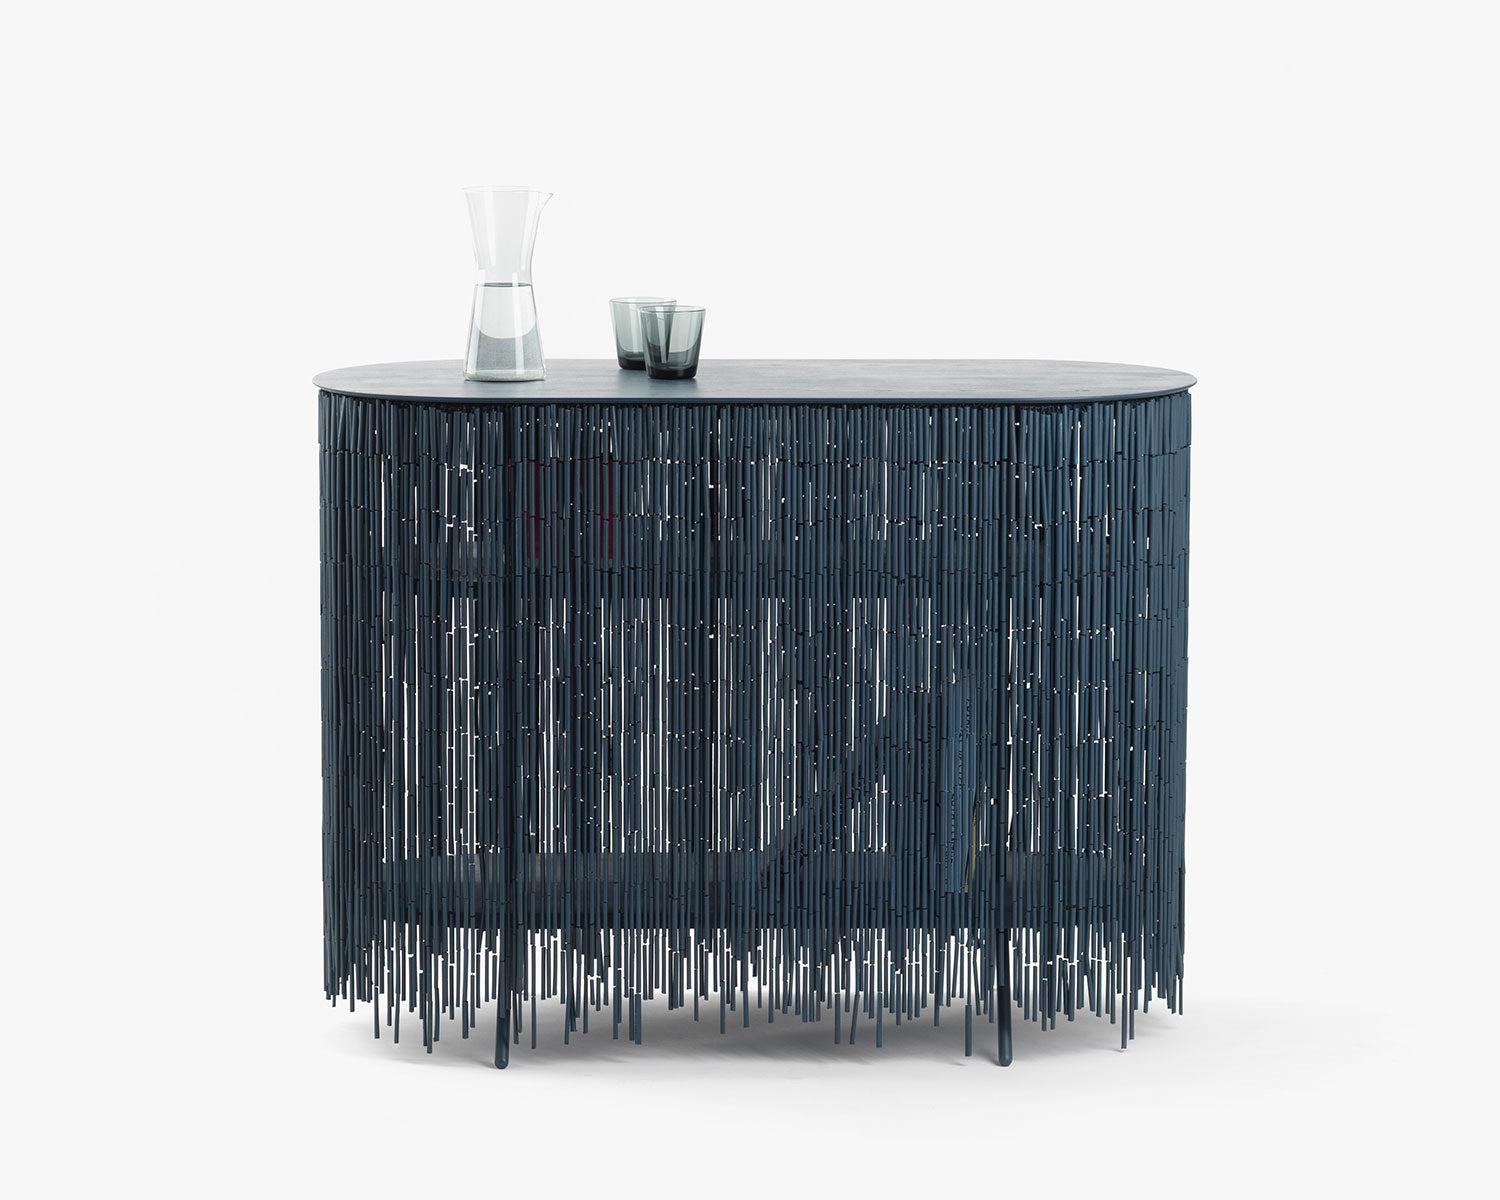 Keefer Credenza by Calen Knauf
Dimensions: D 46 x W 102 x H 76 cm
Materials: Steel, Ash Wood, Bamboo Beads
Also Available: Custom lengths and colours are possible, 

Keefer is a credenza that alludes to the objects stored within its shelves,